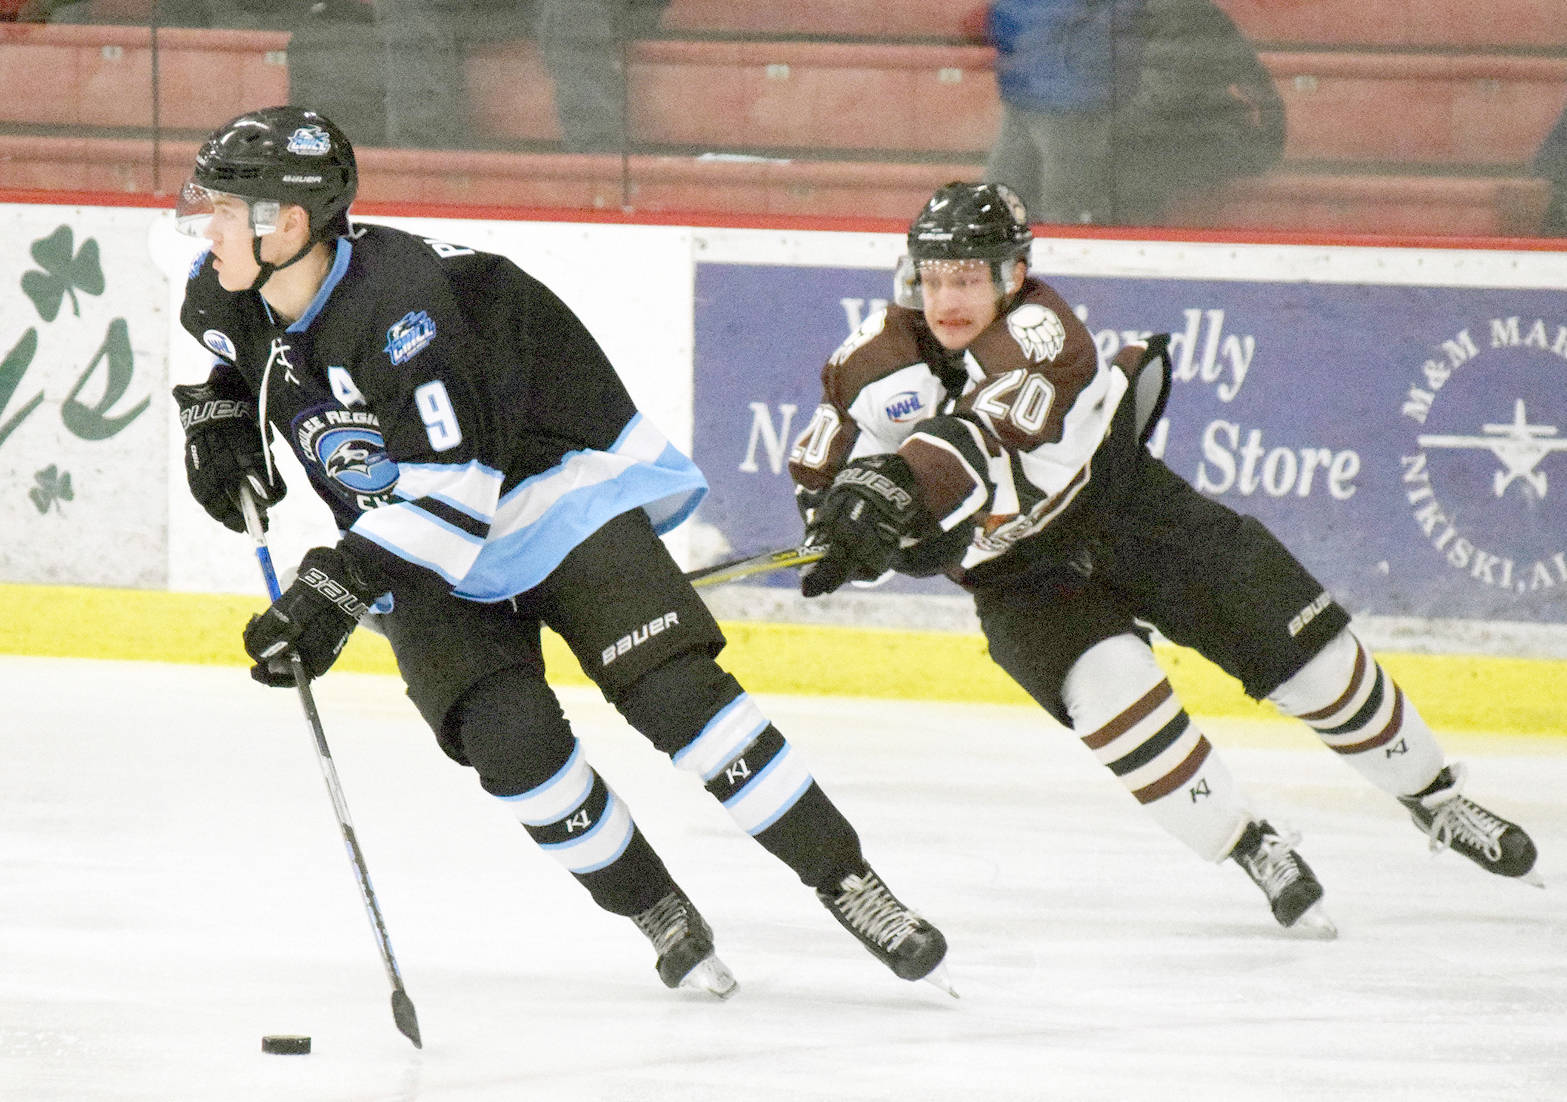 Kenai River forward Tyler Miknich (right) tries to get a stick on Coulee Region defenseman Marshal Plunkett on Jan. 12 at the Soldotna Regional Sports Complex. (Photo by Joey Klecka/Peninsula Clarion)